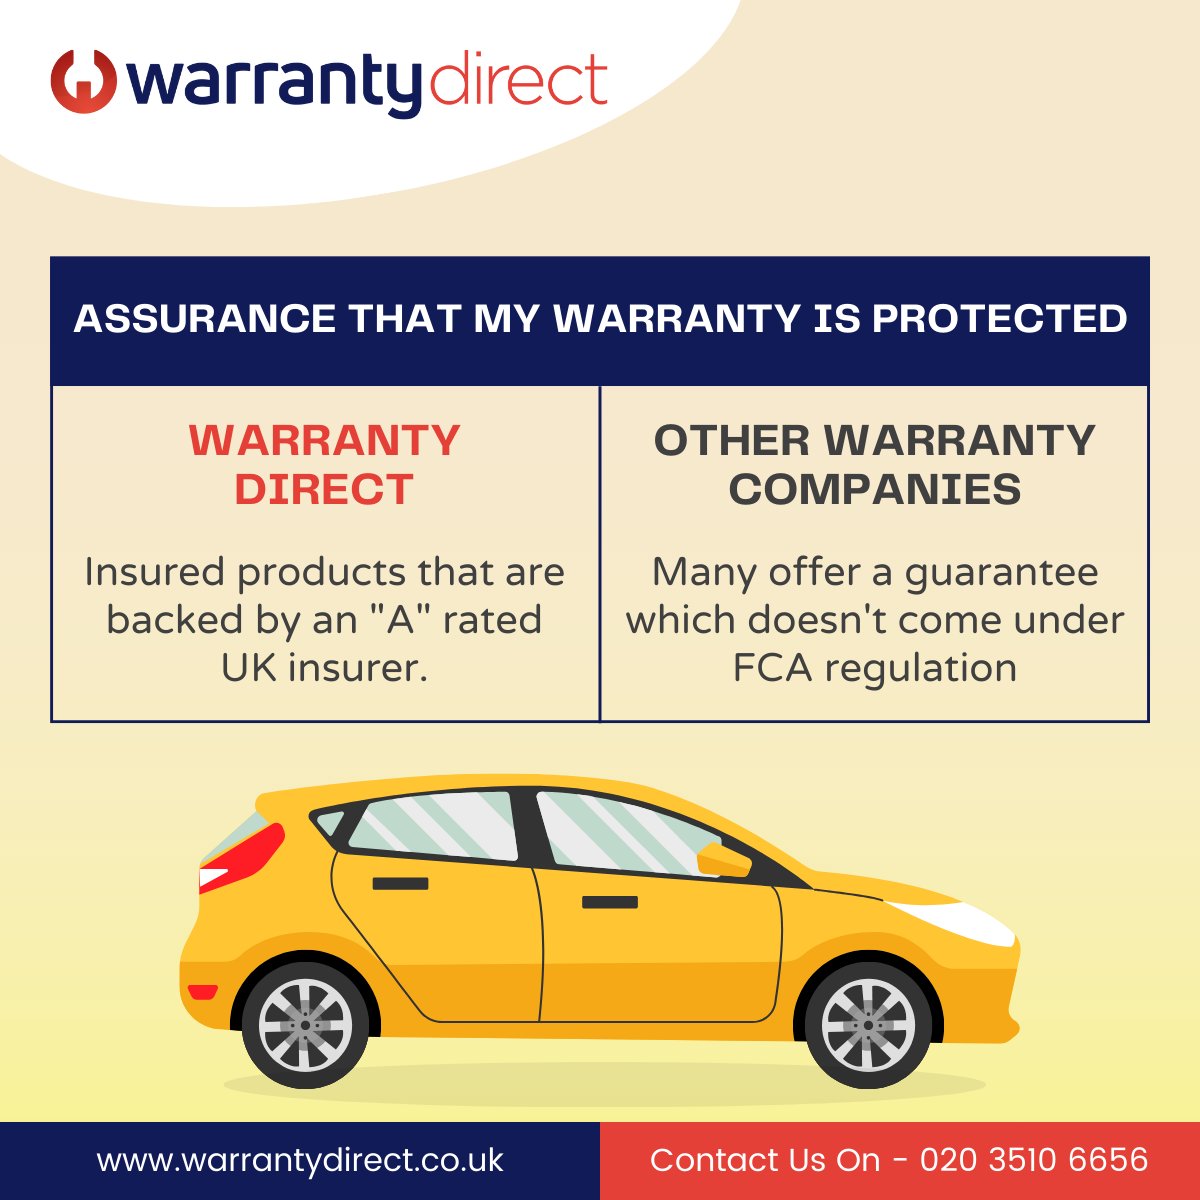 At Warranty Direct, we prioritize your protection with insured products backed by an 'A' rated UK insurer. Don't settle for less with other warranty companies, zurl.co/DVAW #warrantydirect #assurance #carwarranty #warranty #vehiclewarranty #uk #usedcar #cars